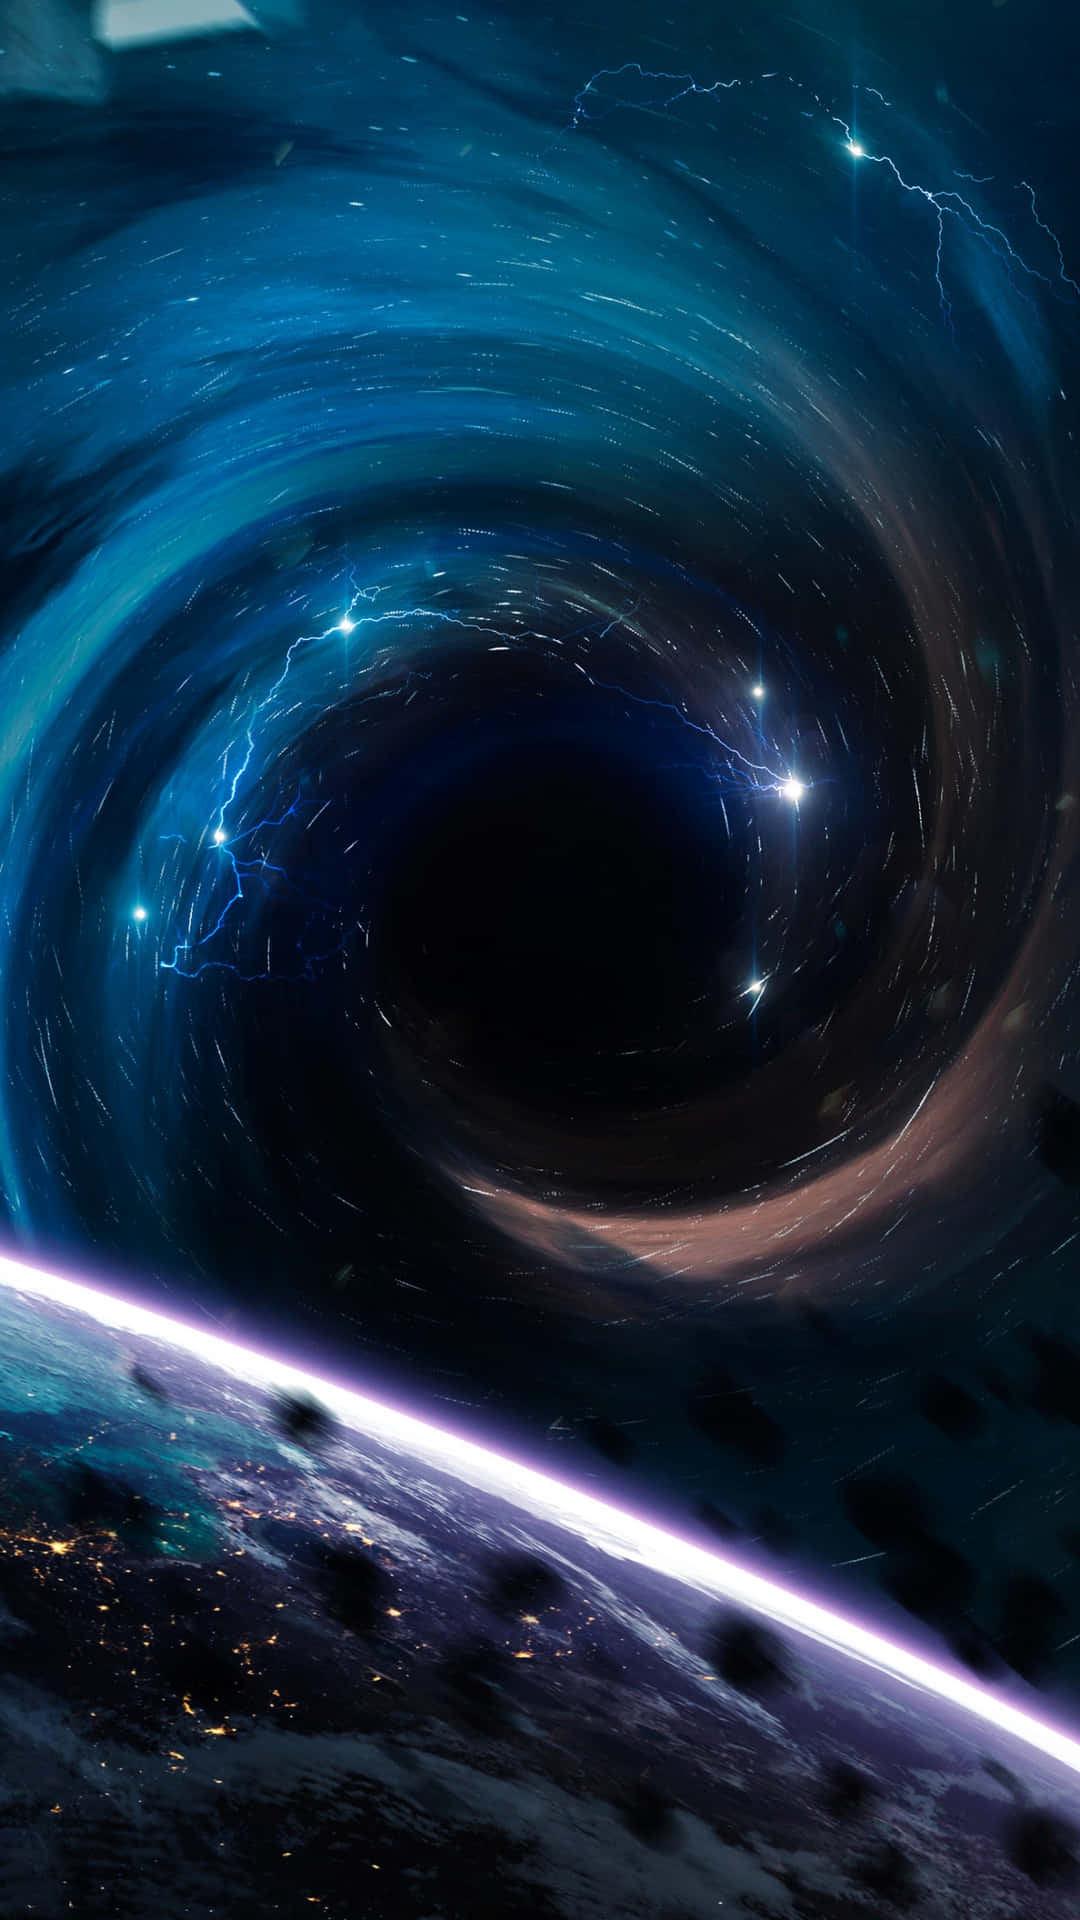 "Take a journey into the depths of the unknown with this mysterious black space." Wallpaper